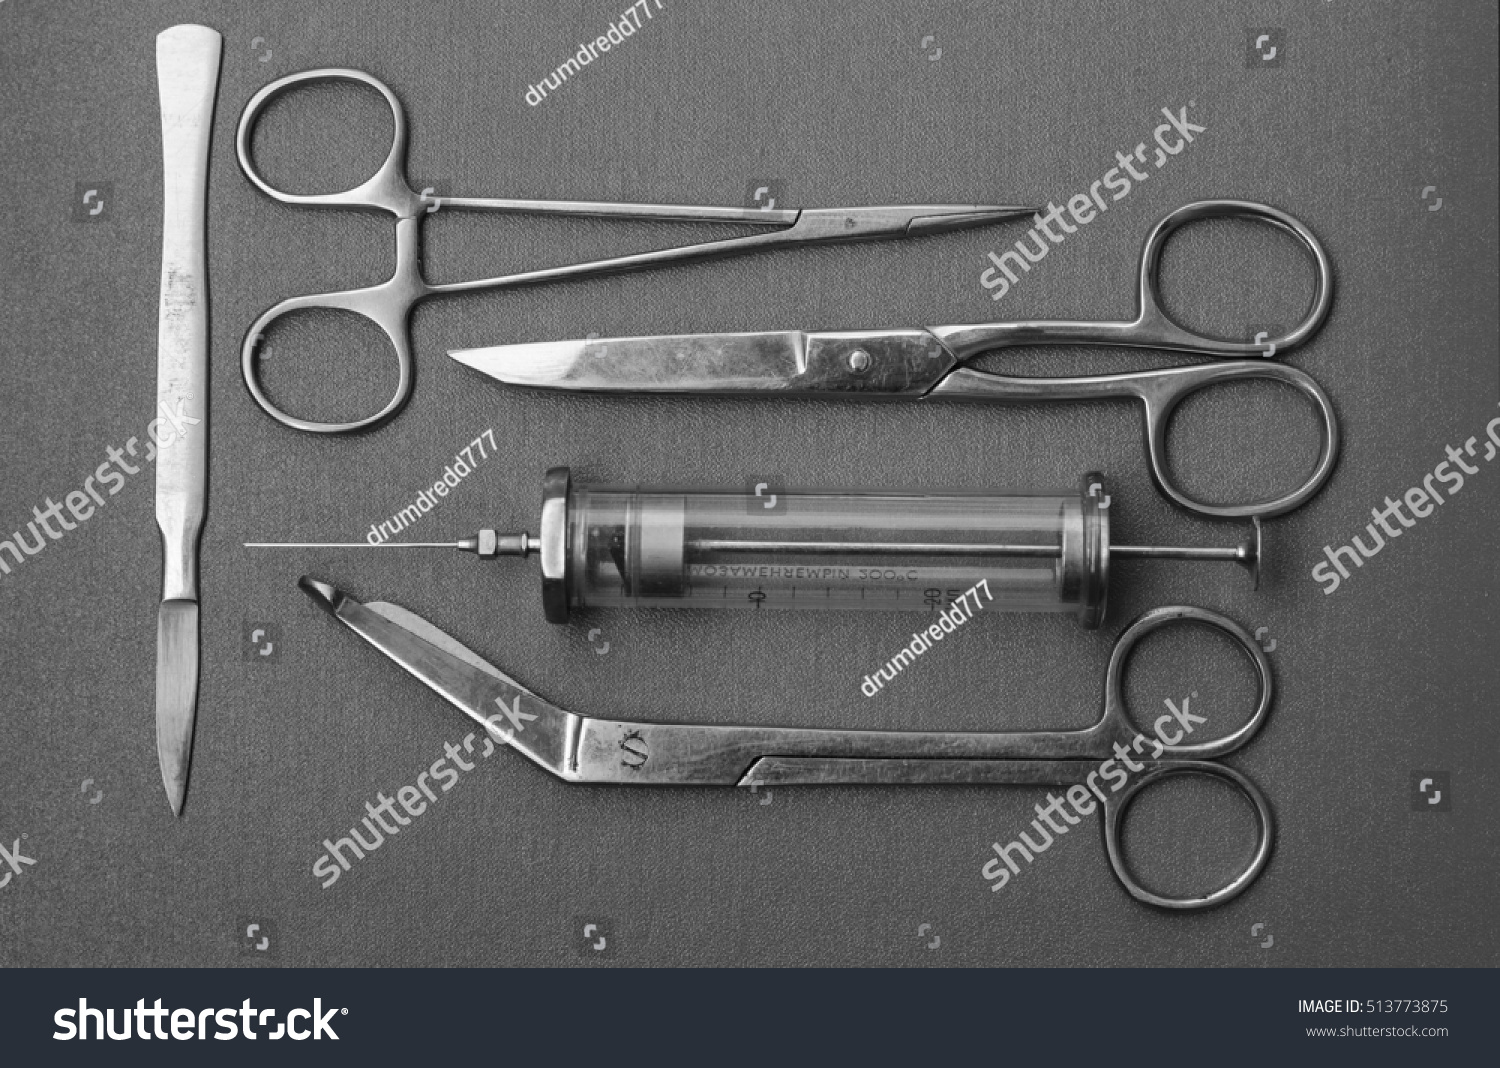 25 New Classification Of Surgical Instruments